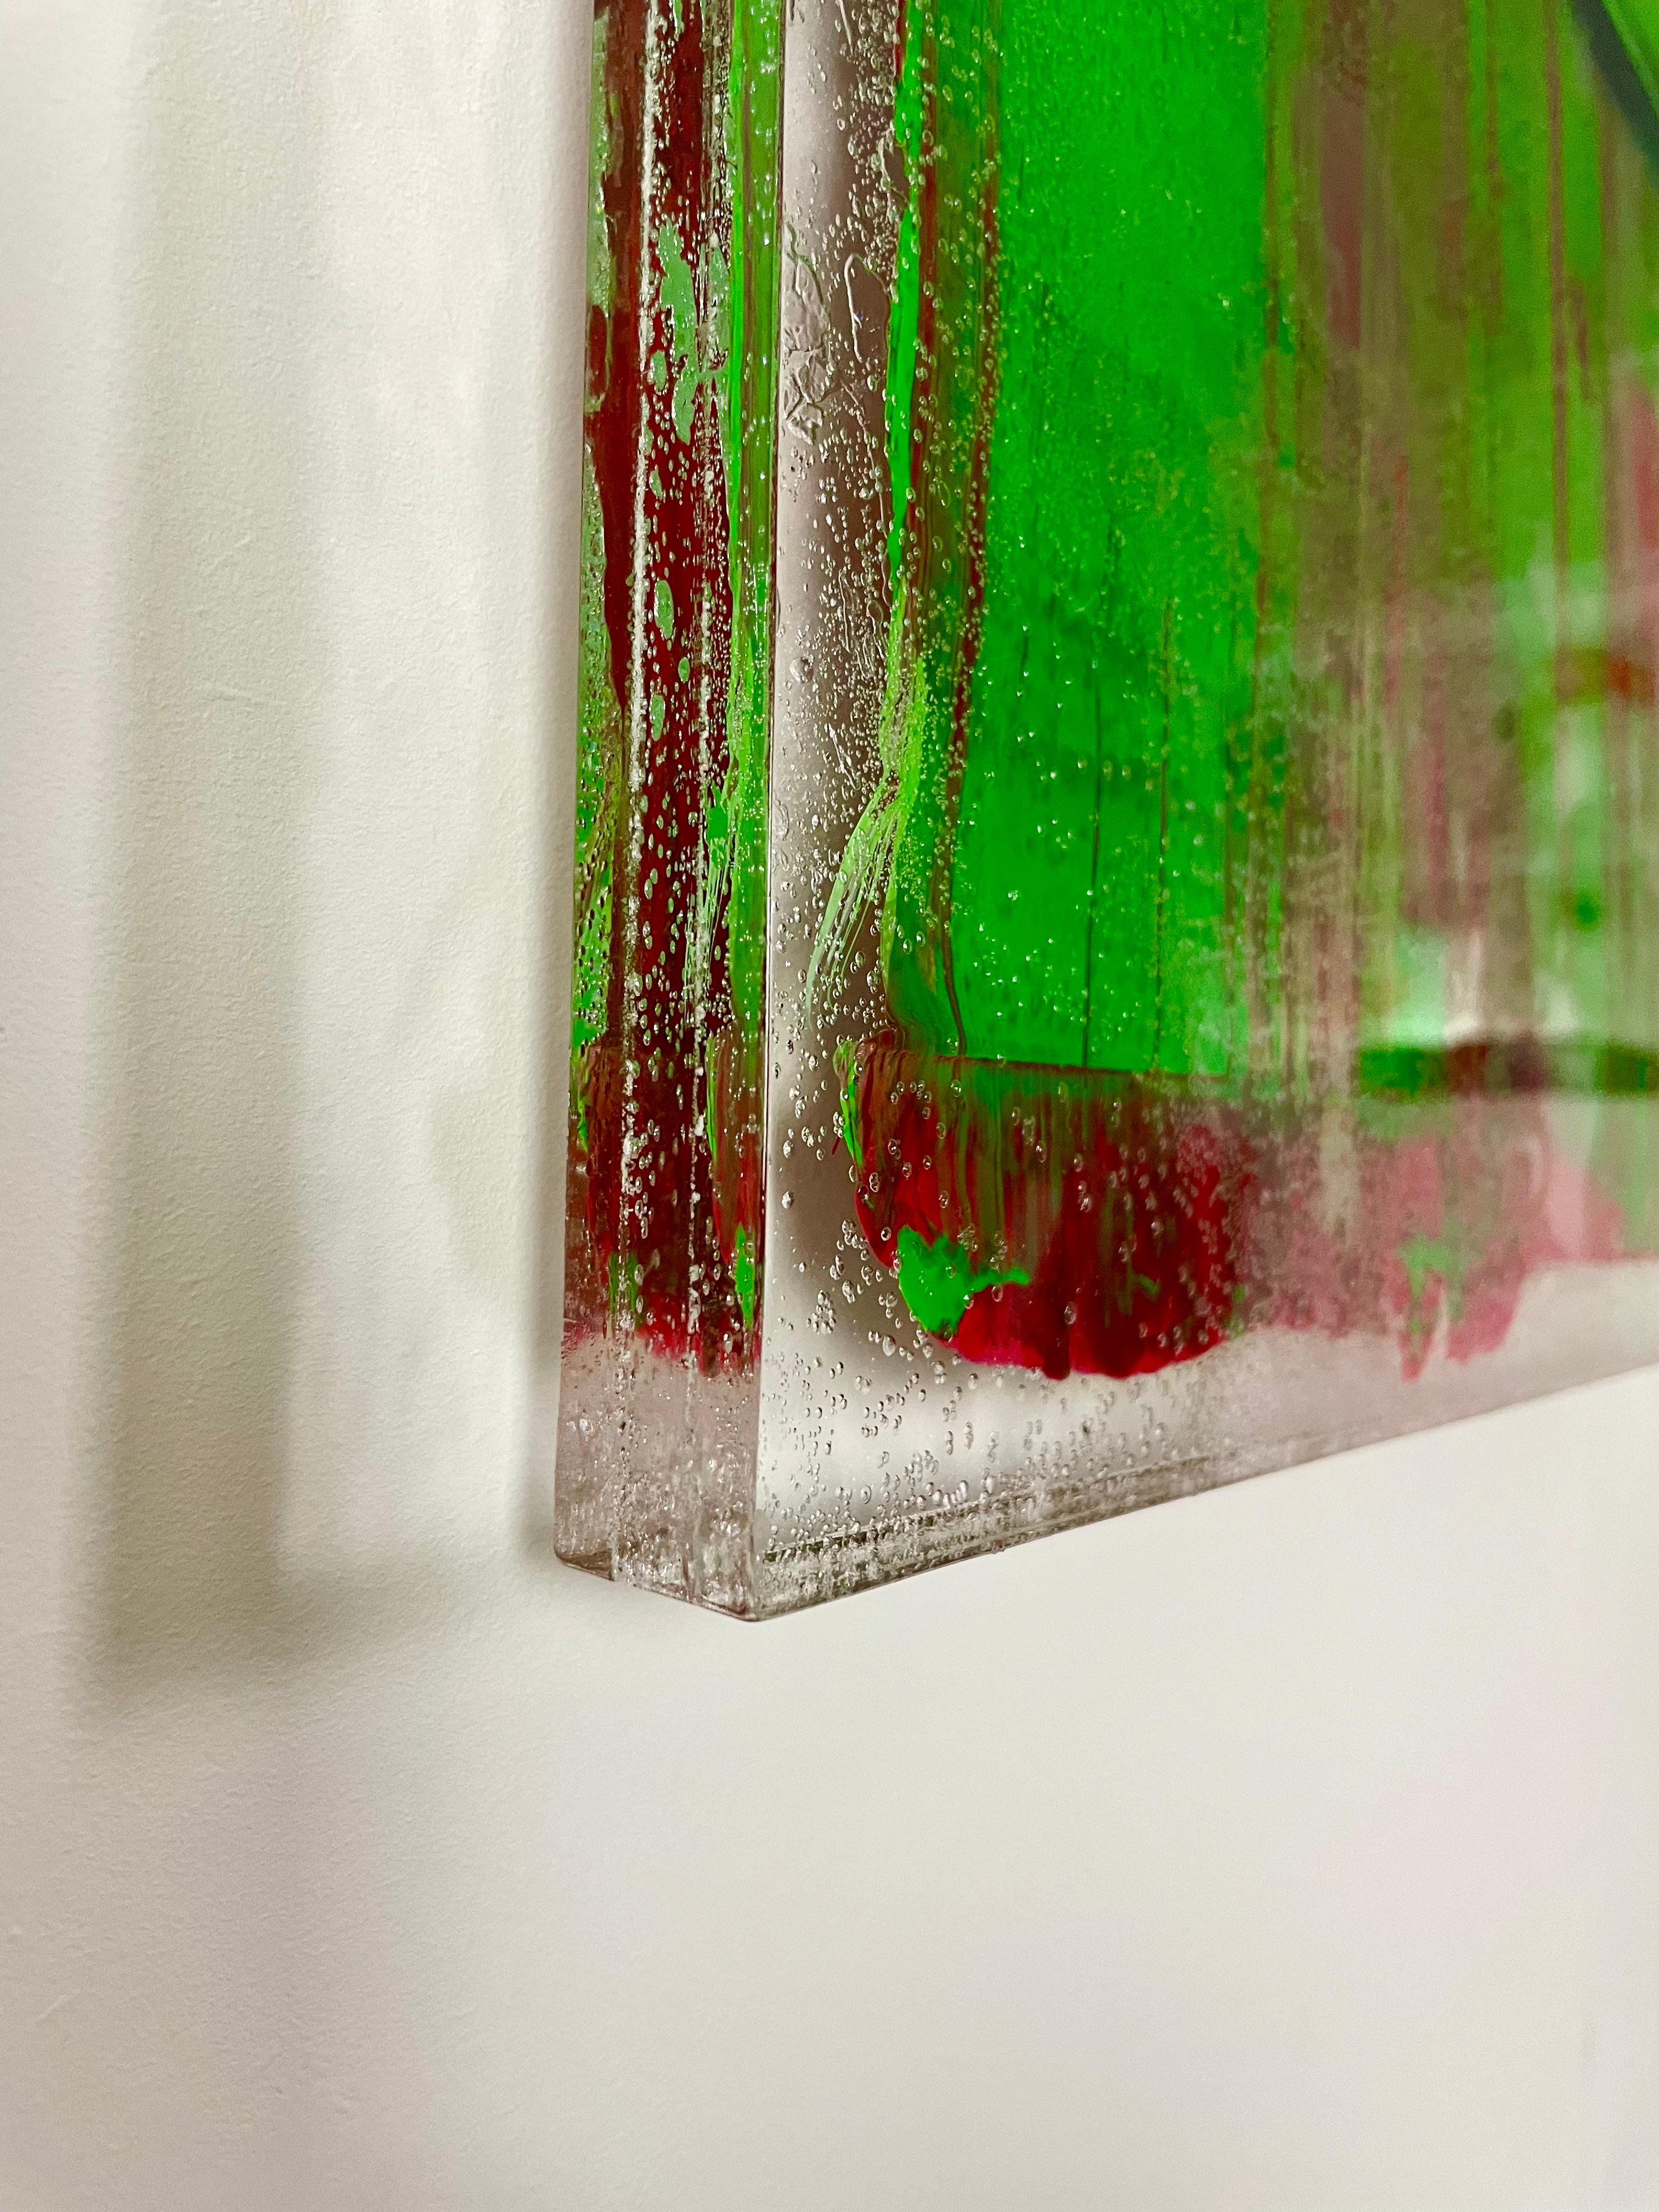 Park Byung-Hoon's work is based completely on color and transparency. It is simple and fundamental, which have been the main concepts of Western art for the past 40 years. His works are based on the concept that creativity is produced from belief